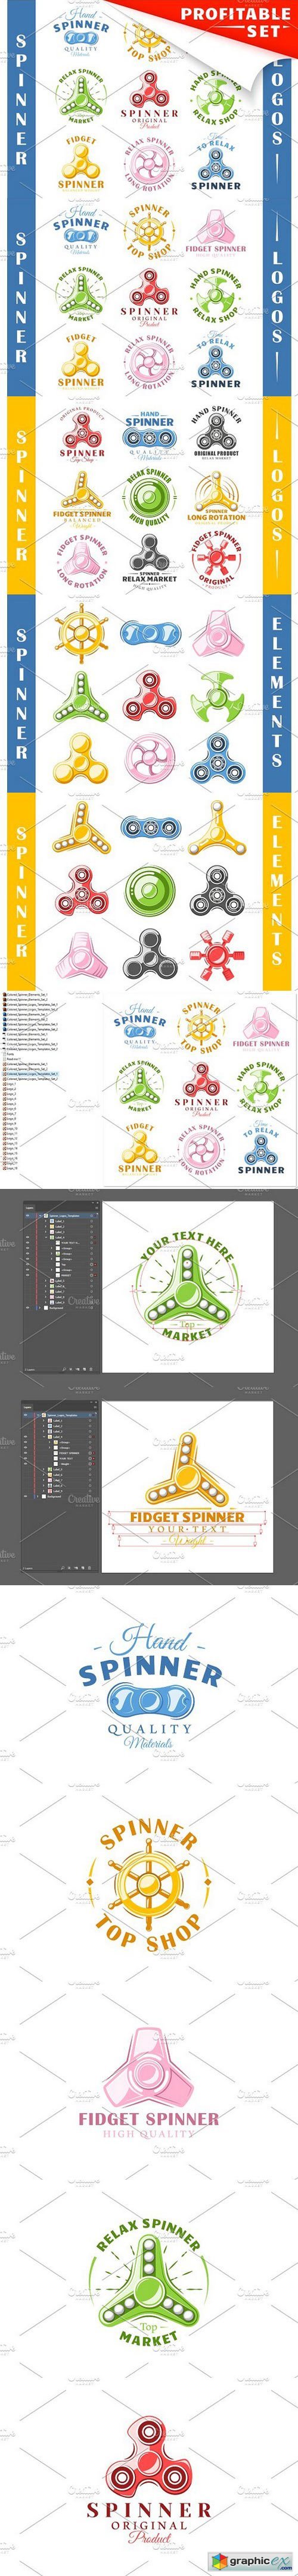 18 Colored Spinner Logos Templates